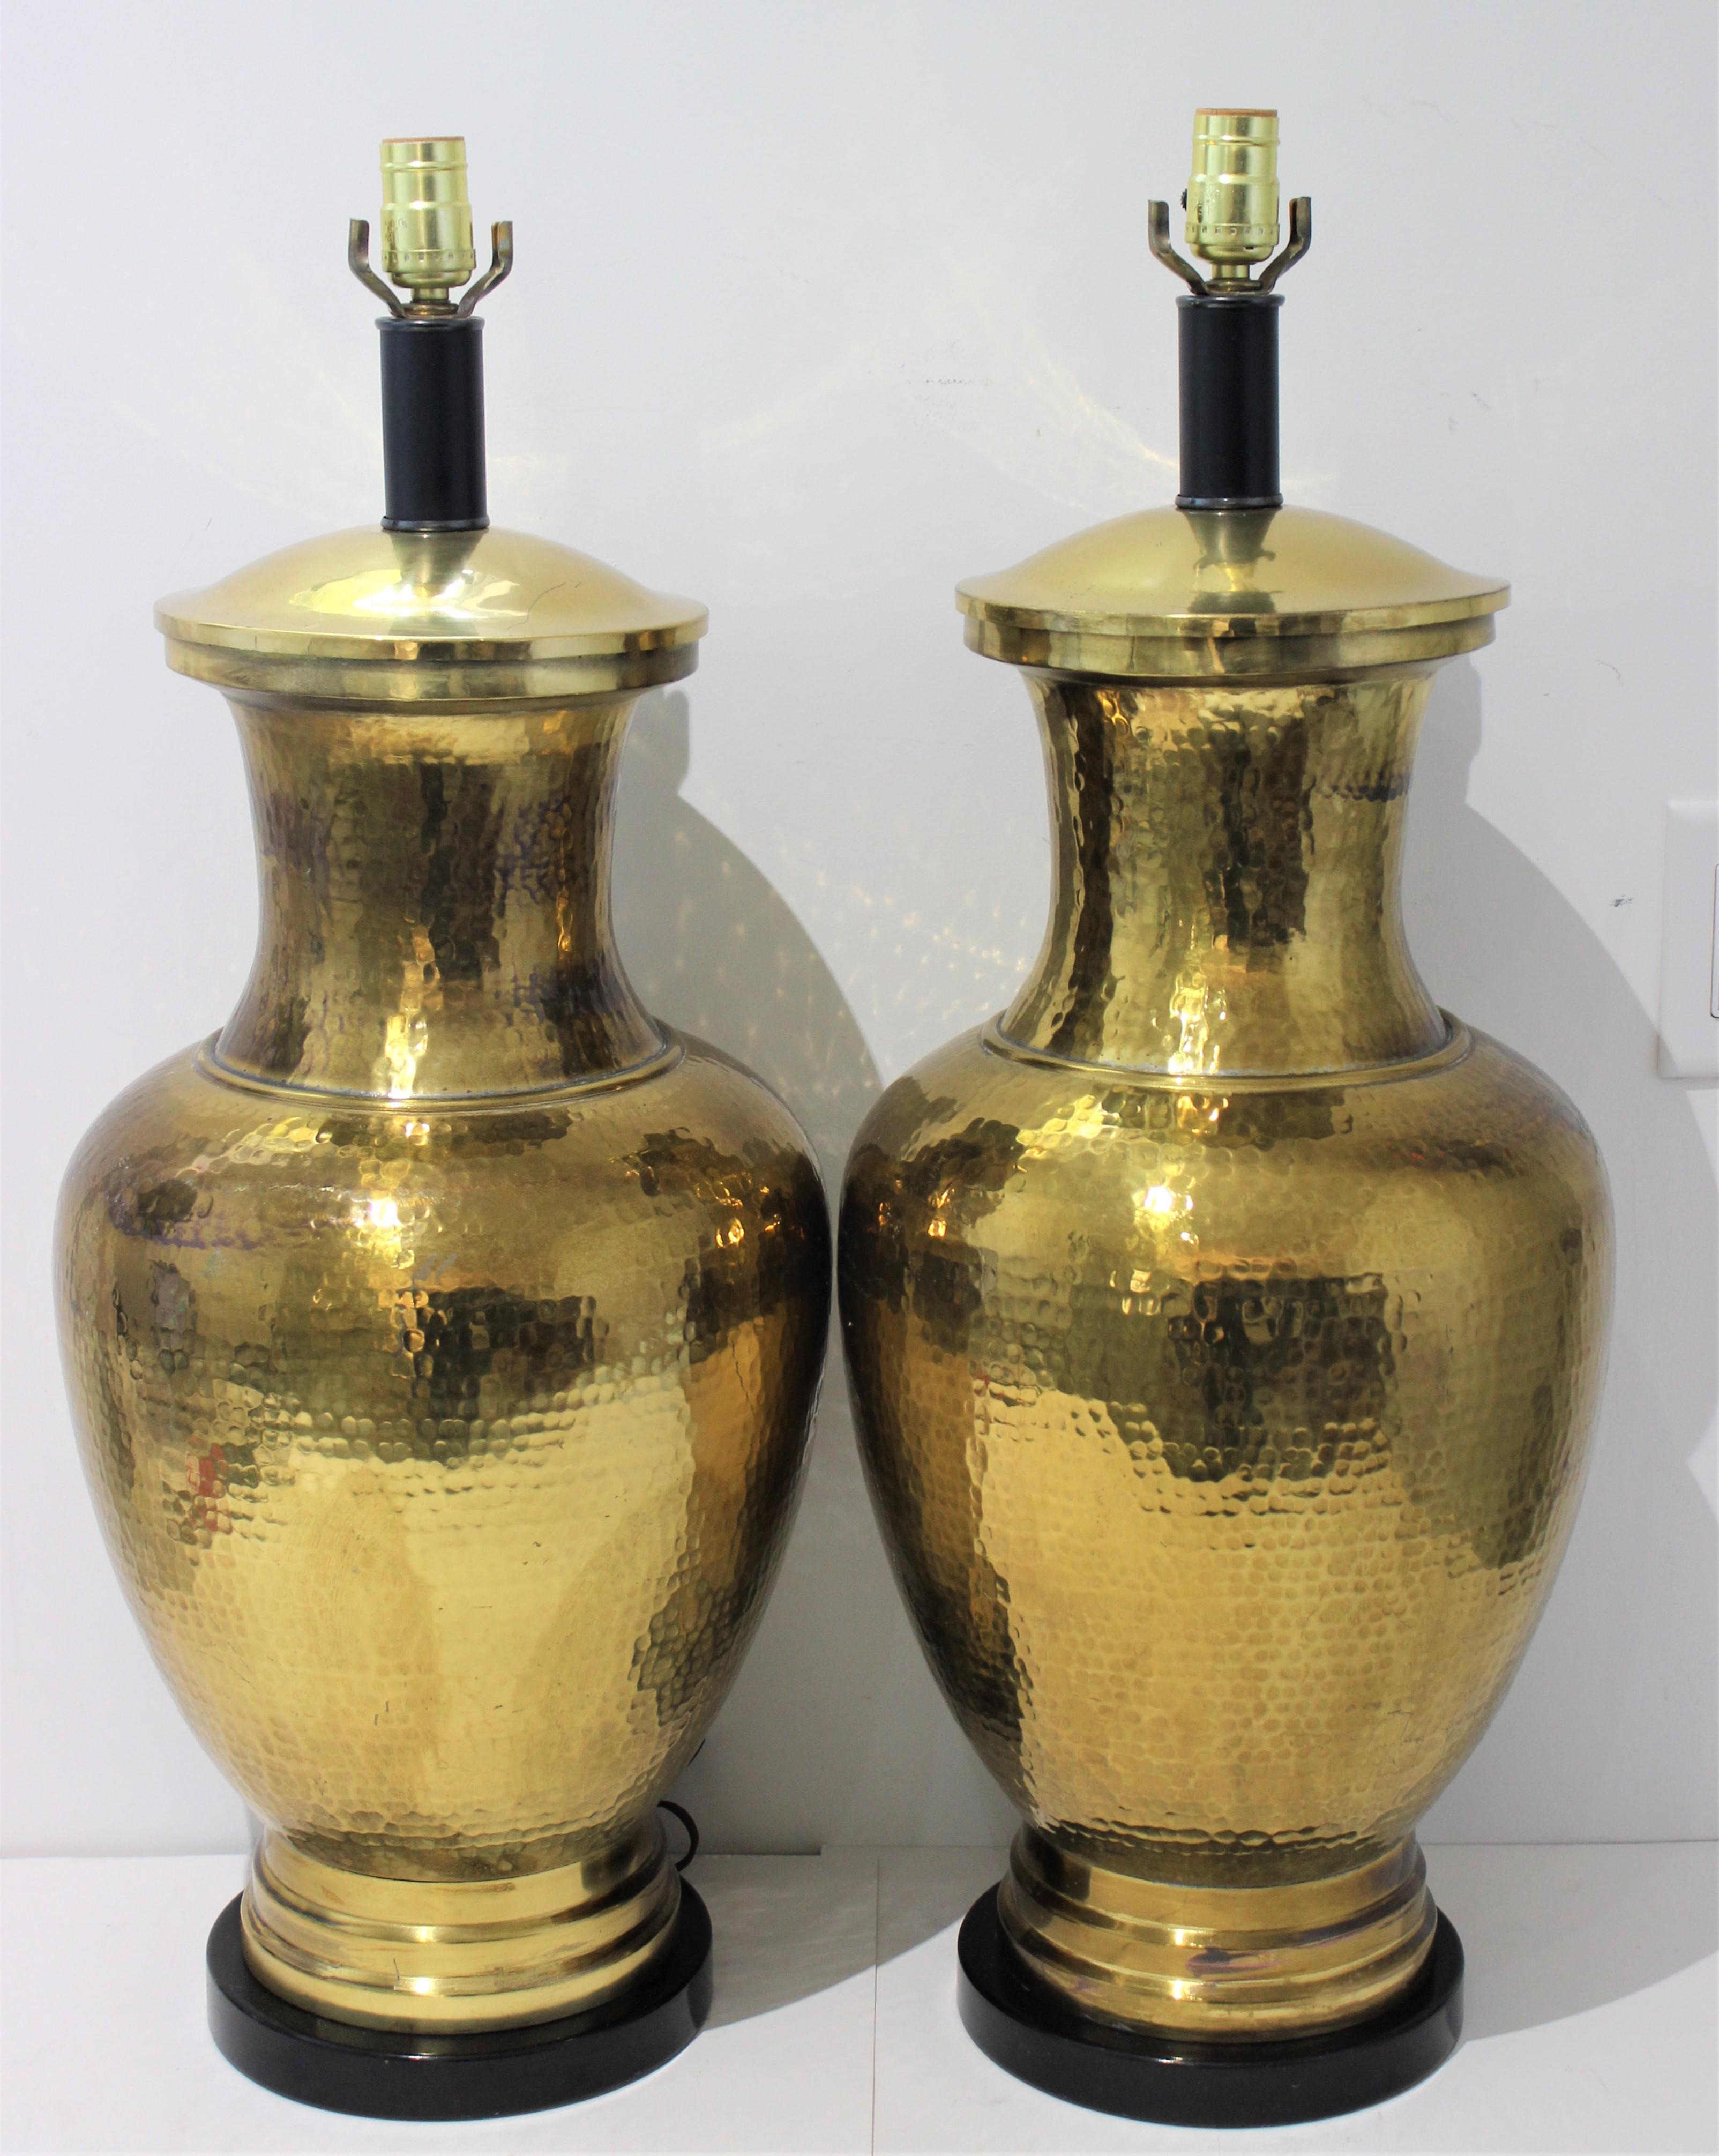 Large mid-century table Lamps made from Artisan hammered brass vases - a pair - from a Palm Beach estate

overall size, height to top of socket 29 1/2